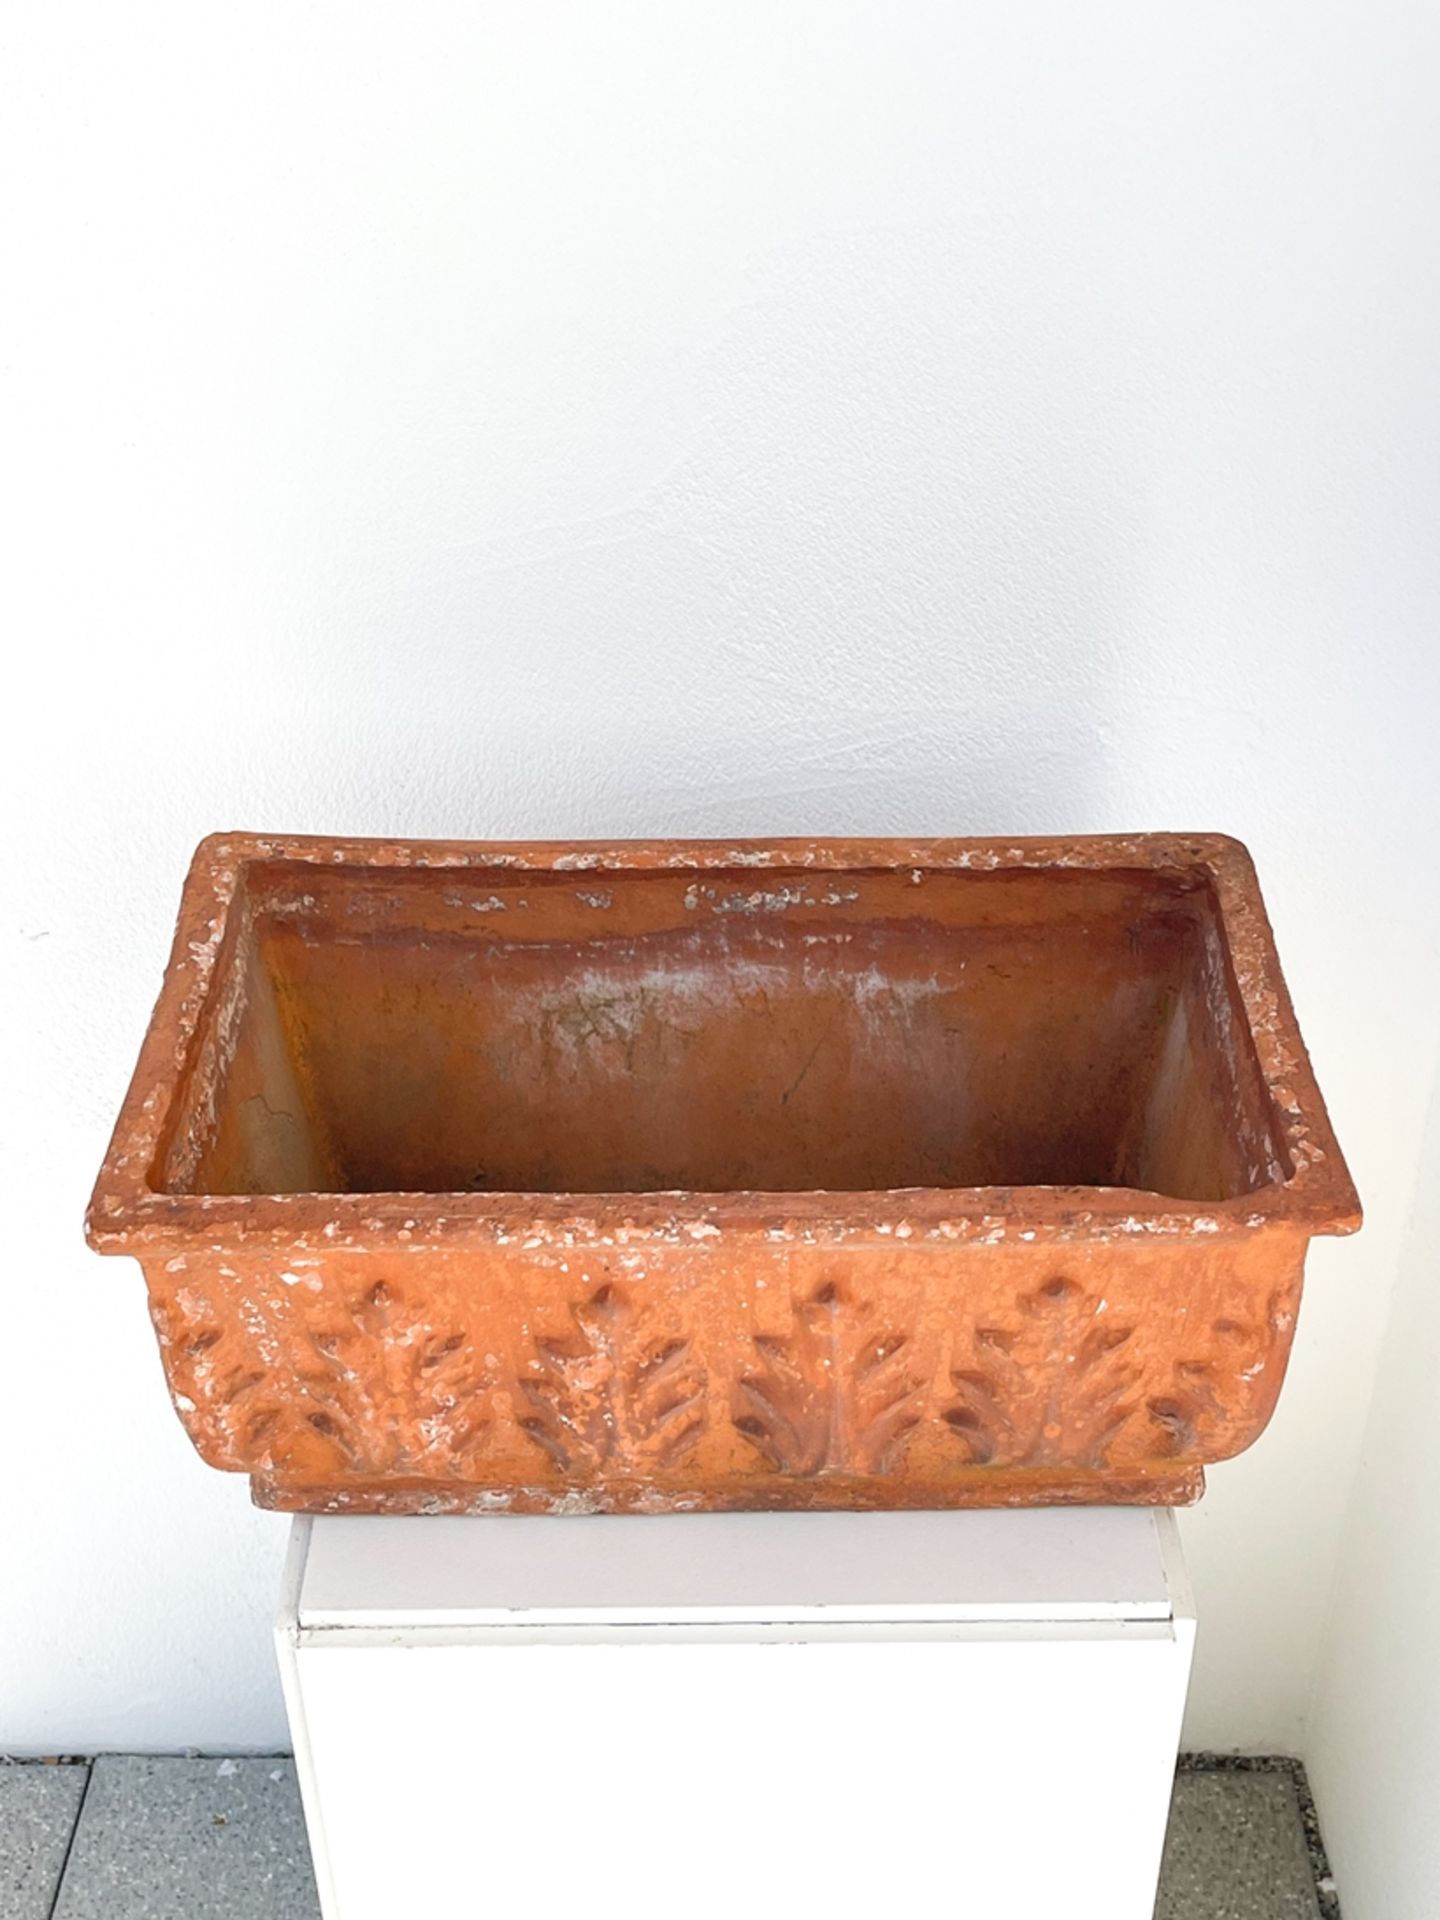 Terracotta Pflanztrog/Schale - Image 2 of 5